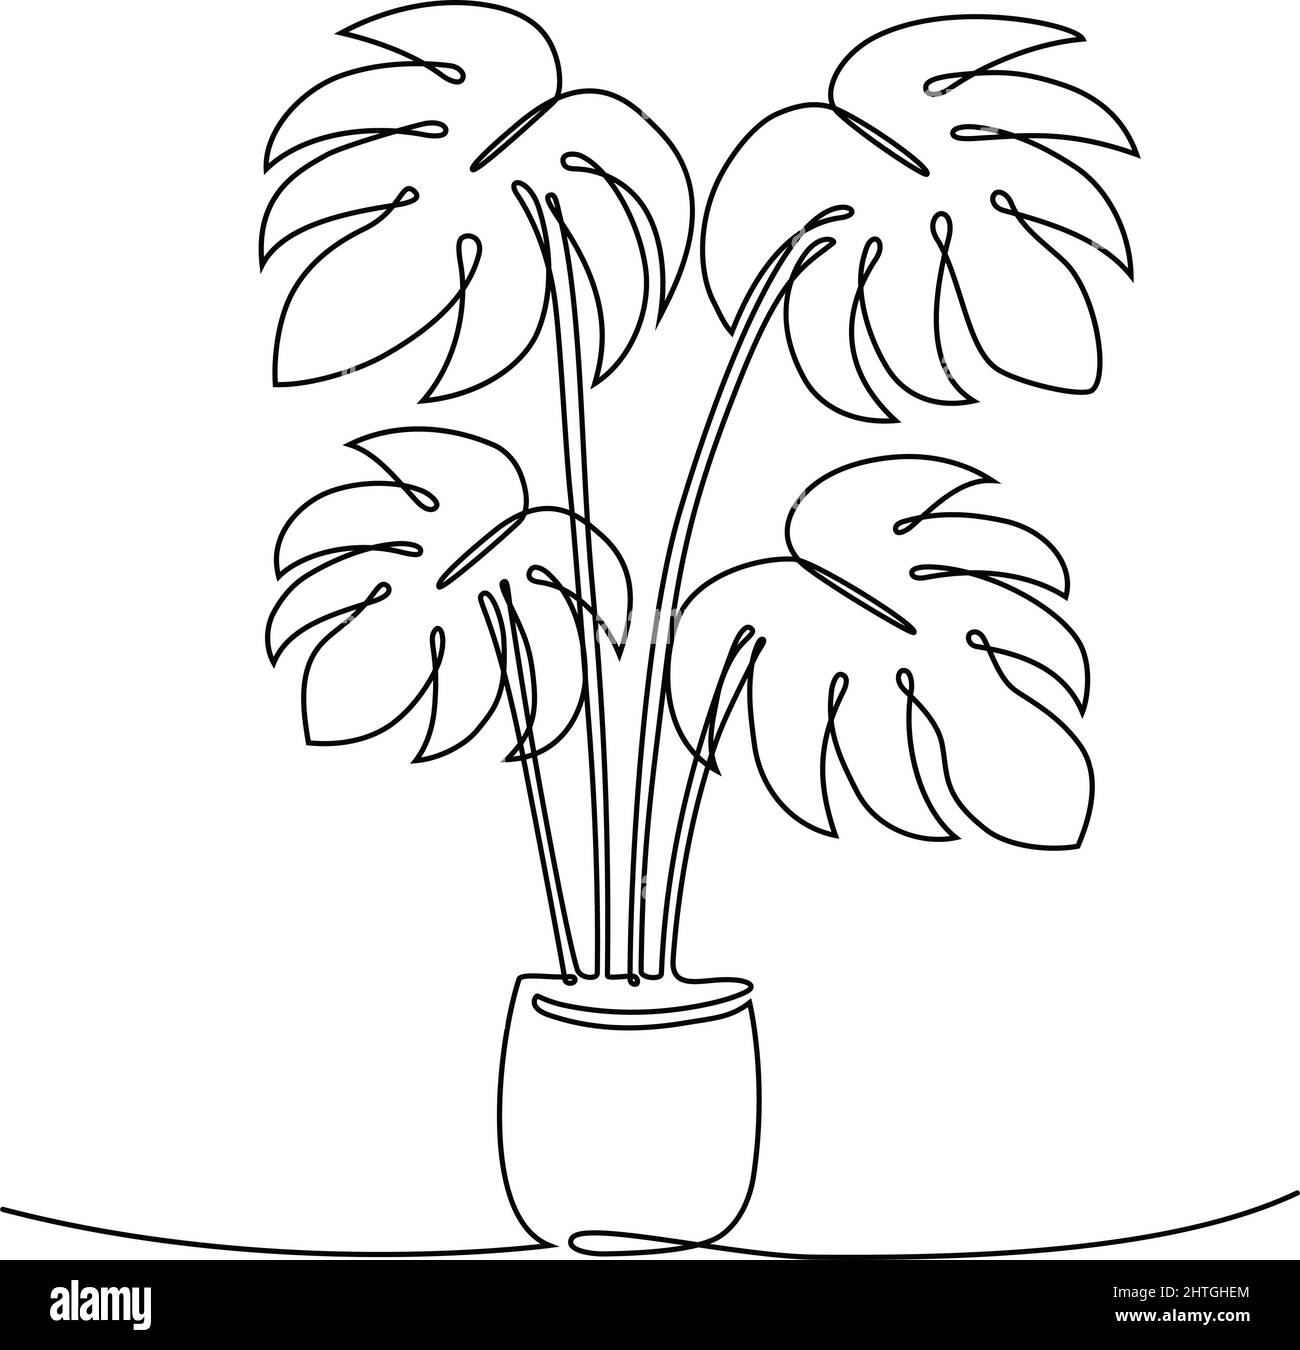 Houseplant monstera in one continuous line drawing, vector illustration ...